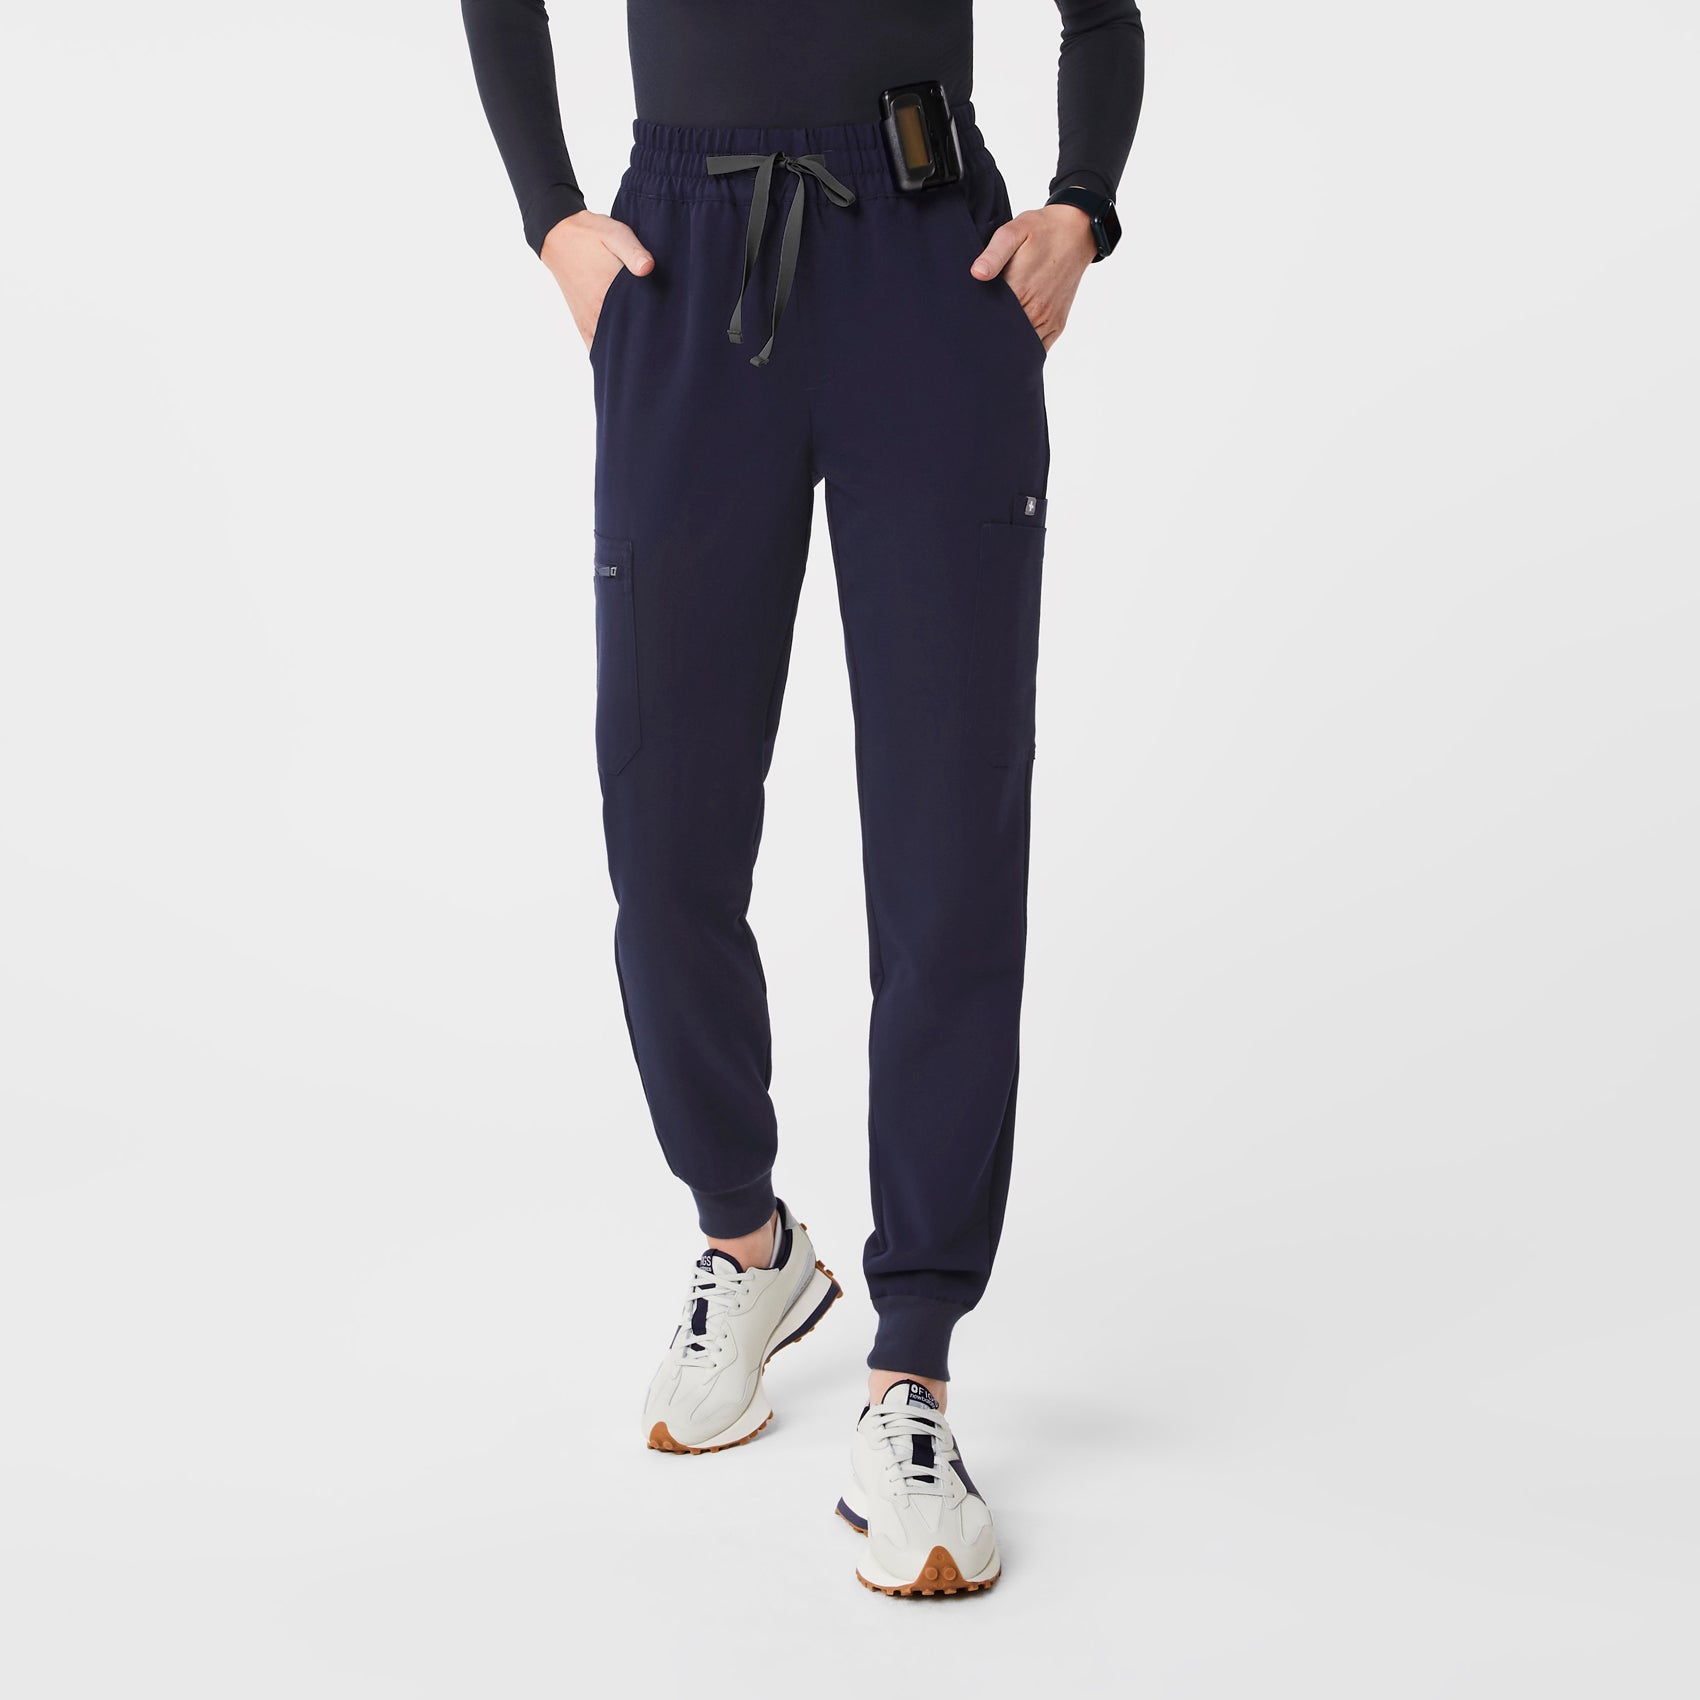 Figs High Waisted Zamora Jogger Scrub Pants - Desert Rose - S - Petite and  12 other listings are in stock at Figs : r/FigsRestockAlerts